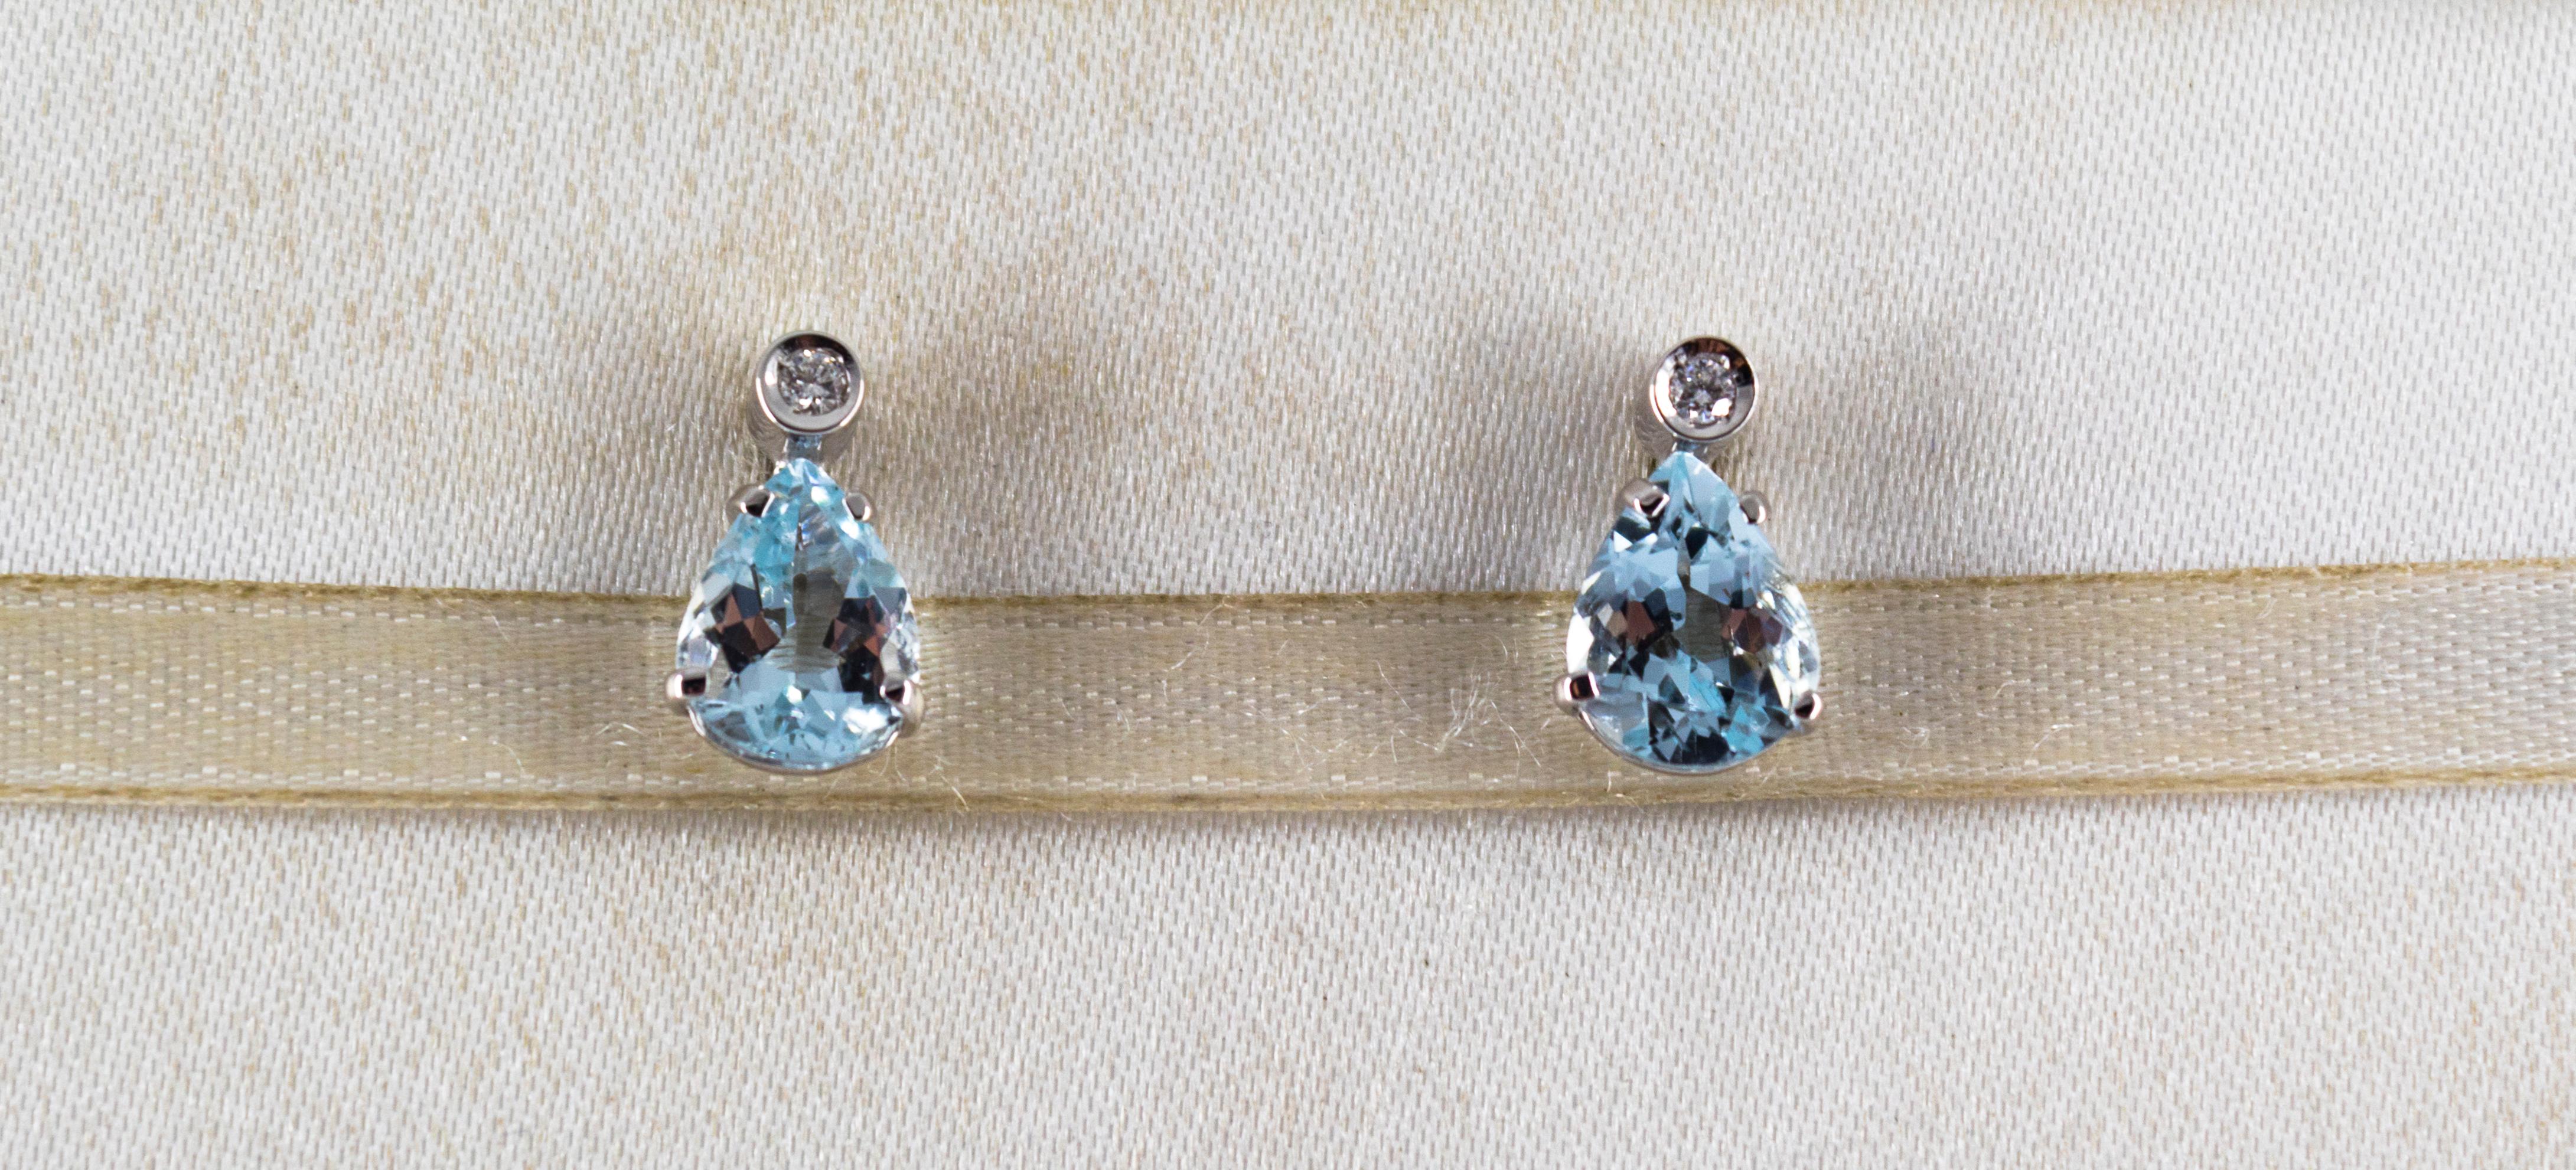 These Earrings are made of 18K White Gold.
These Earrings have 0.06 Carats of White Diamonds.
These Earrings have 2.40 Carats of Aquamarine.
These Earrings are inspired by Art Deco.
All our Earrings have pins for pierced ears but we can change the